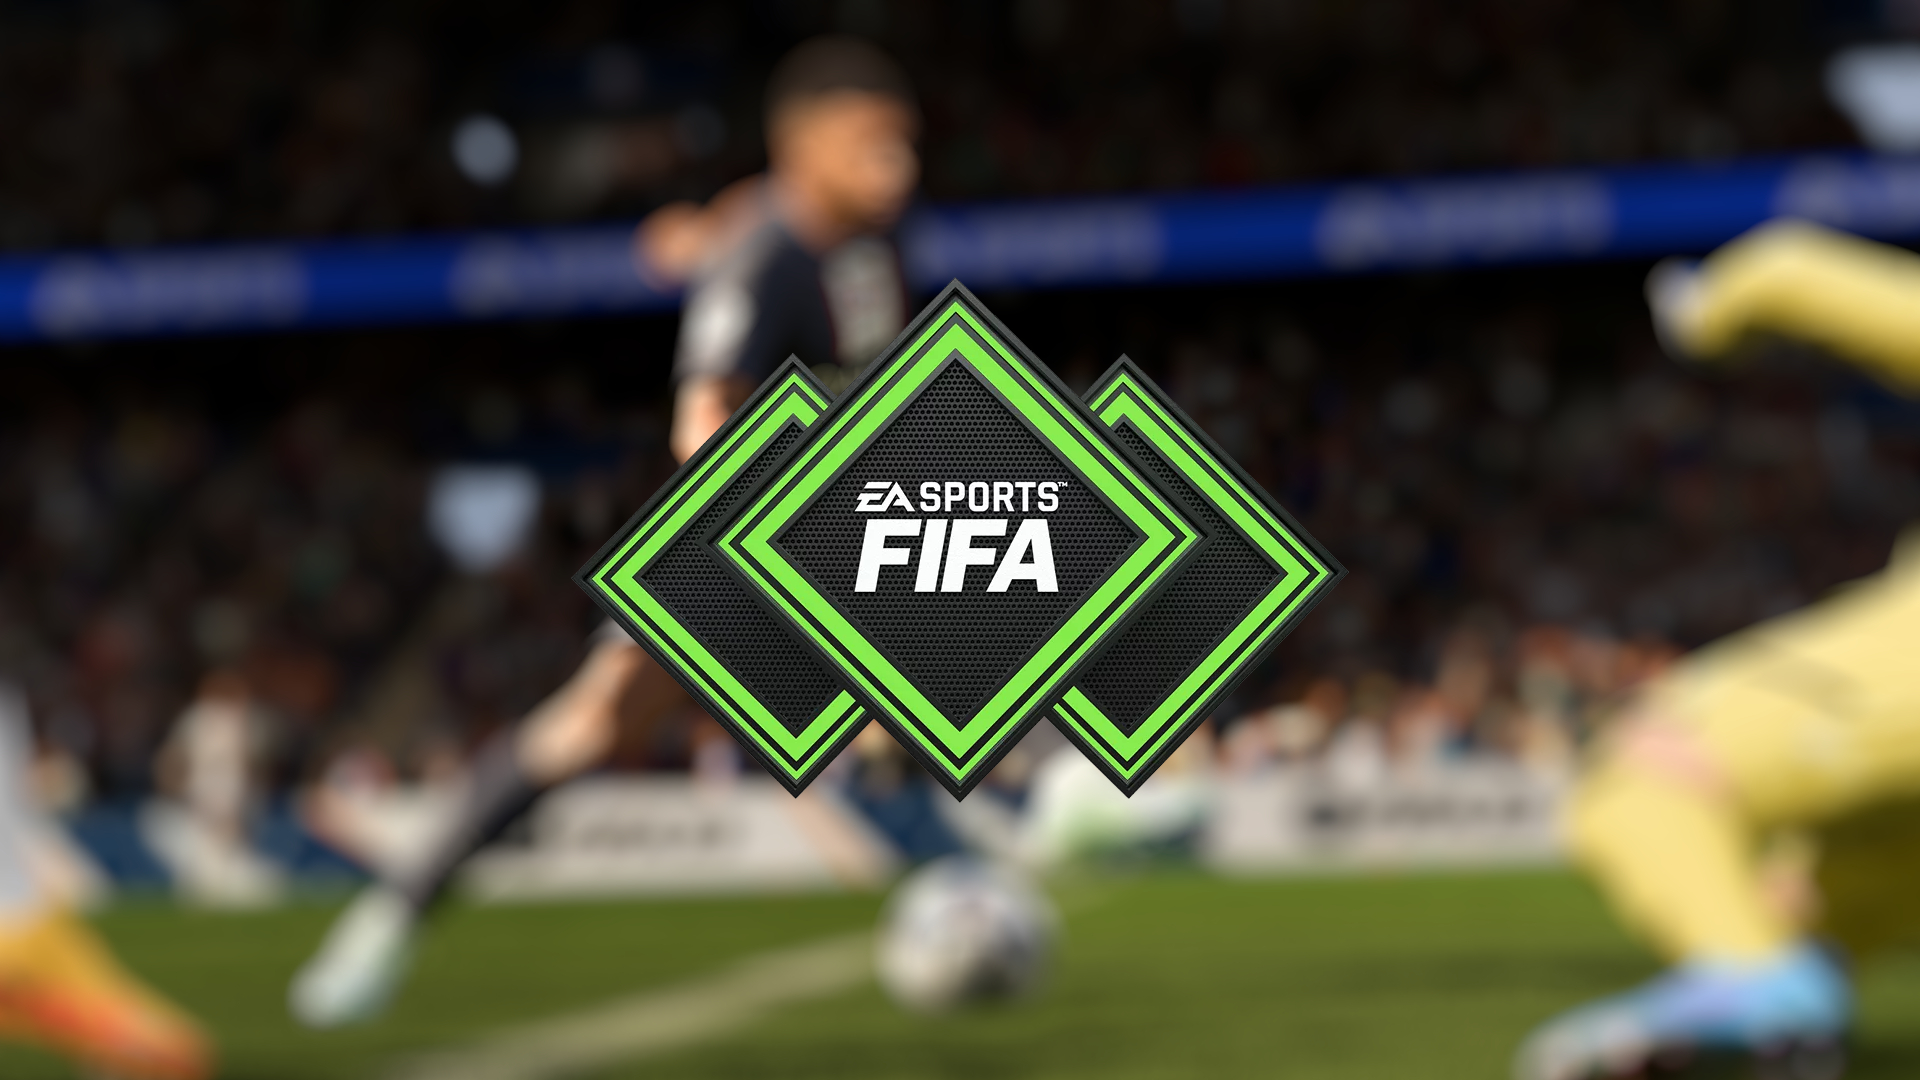 FifaTradingRomania on X: ✓As confirmed by EA Help, you can transfer your  FIFA Points from FIFA 23 to EAFC24 🔹You can do this by logging into  console/PC. . #eafc24 #eafcpoints #fifapoints  /